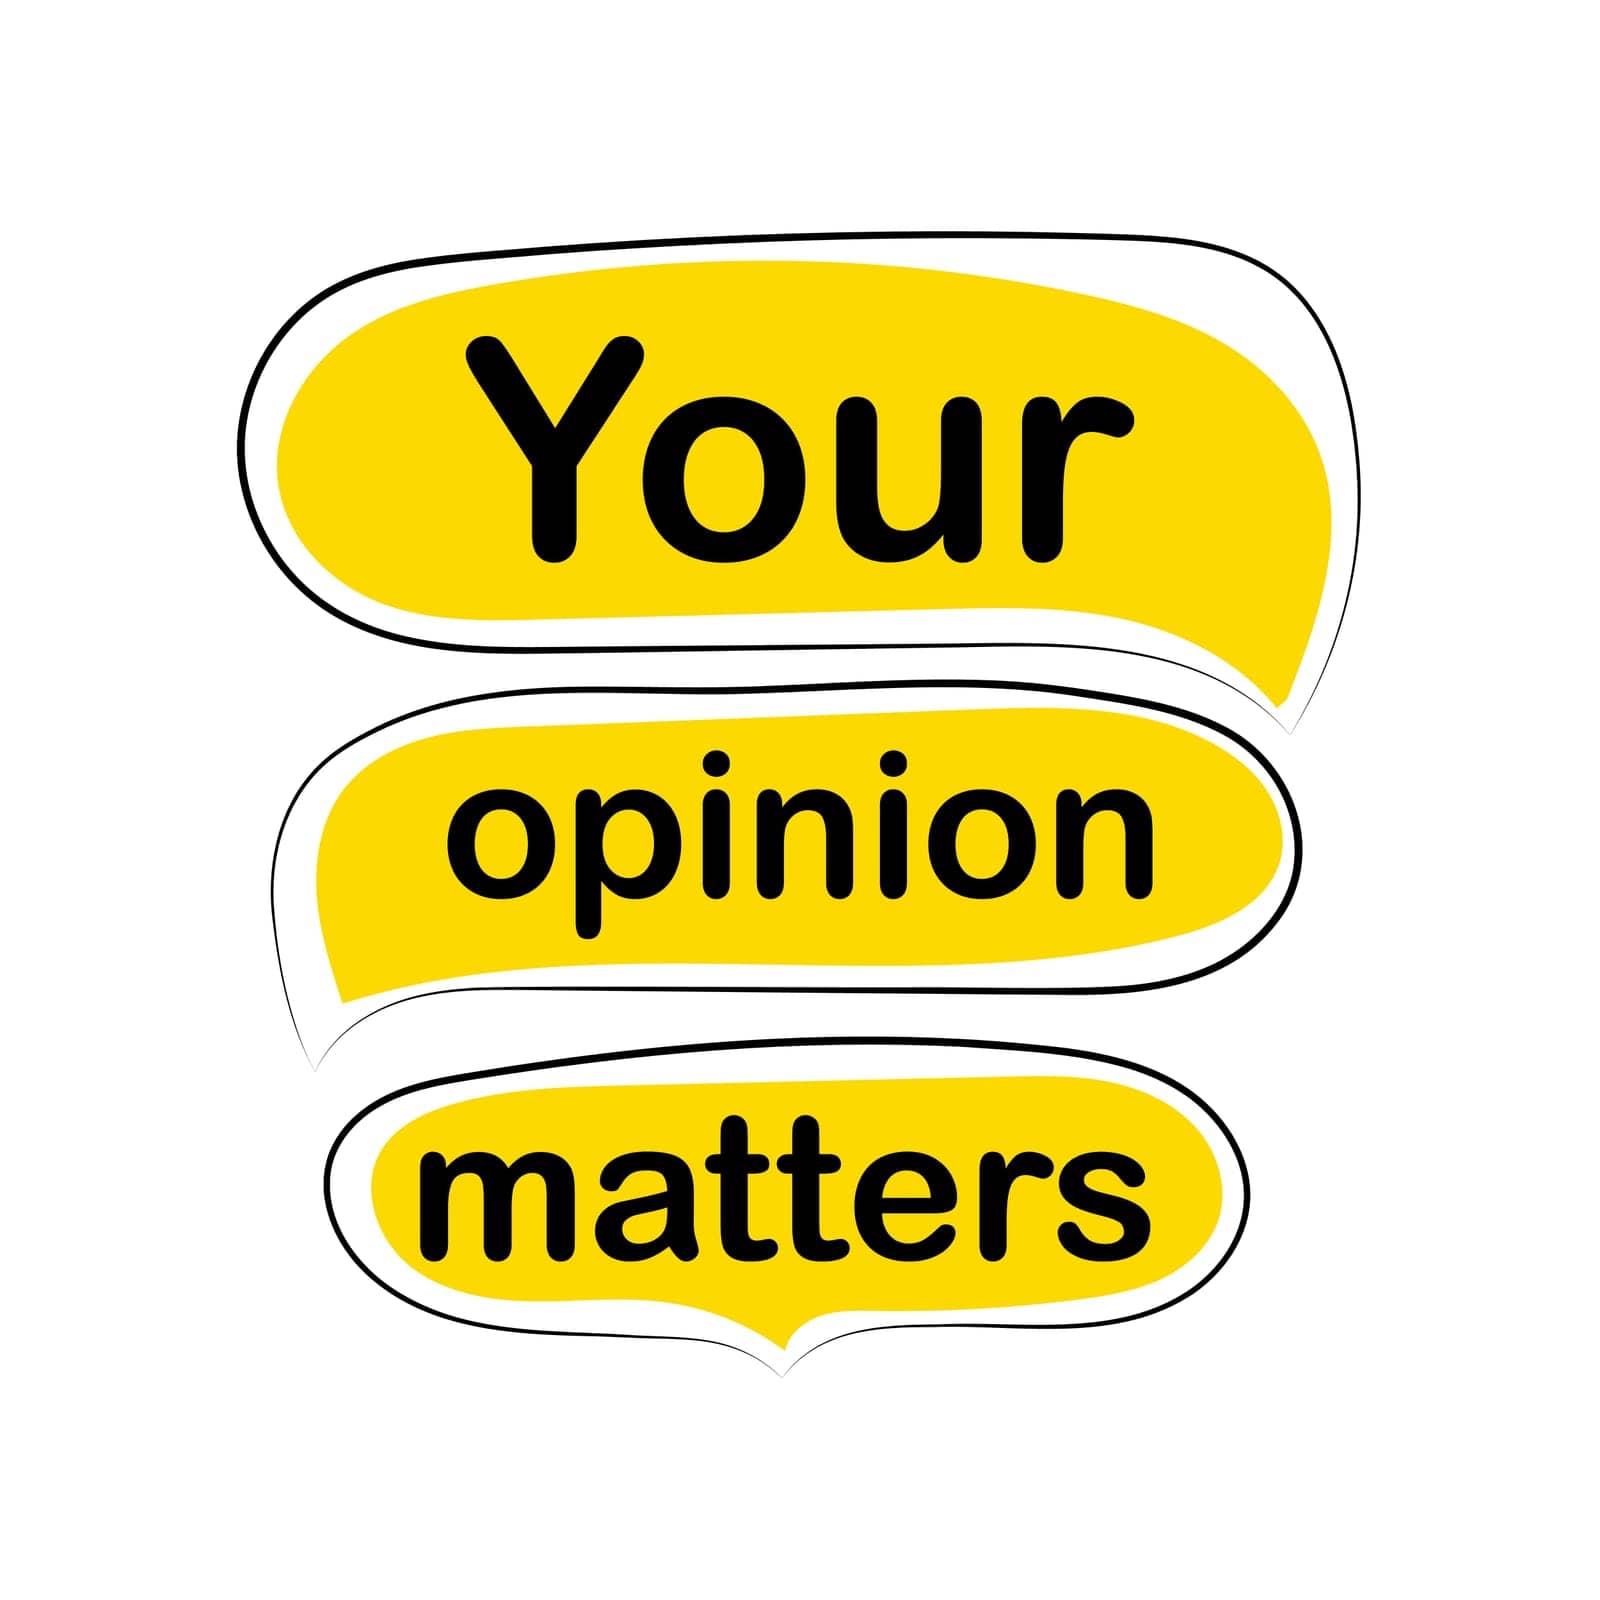 Your opinion matters on speech bubble by MakeVector